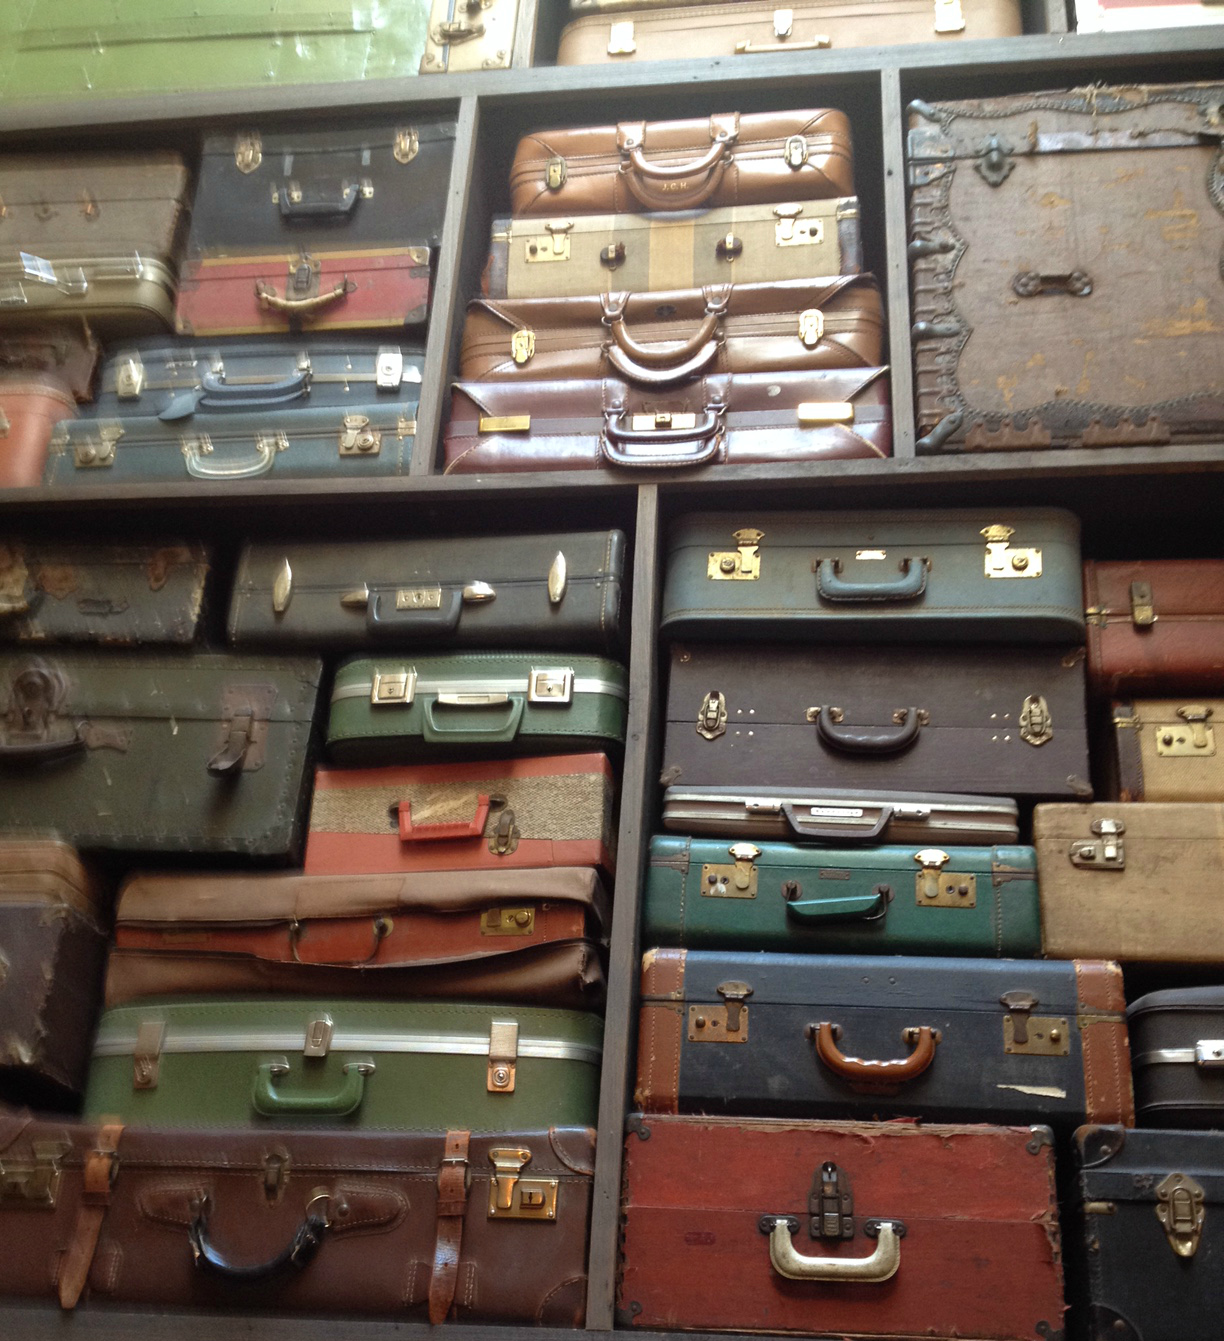 containers-suitcases-cropped-photo-by-joe-mckendrick.jpg